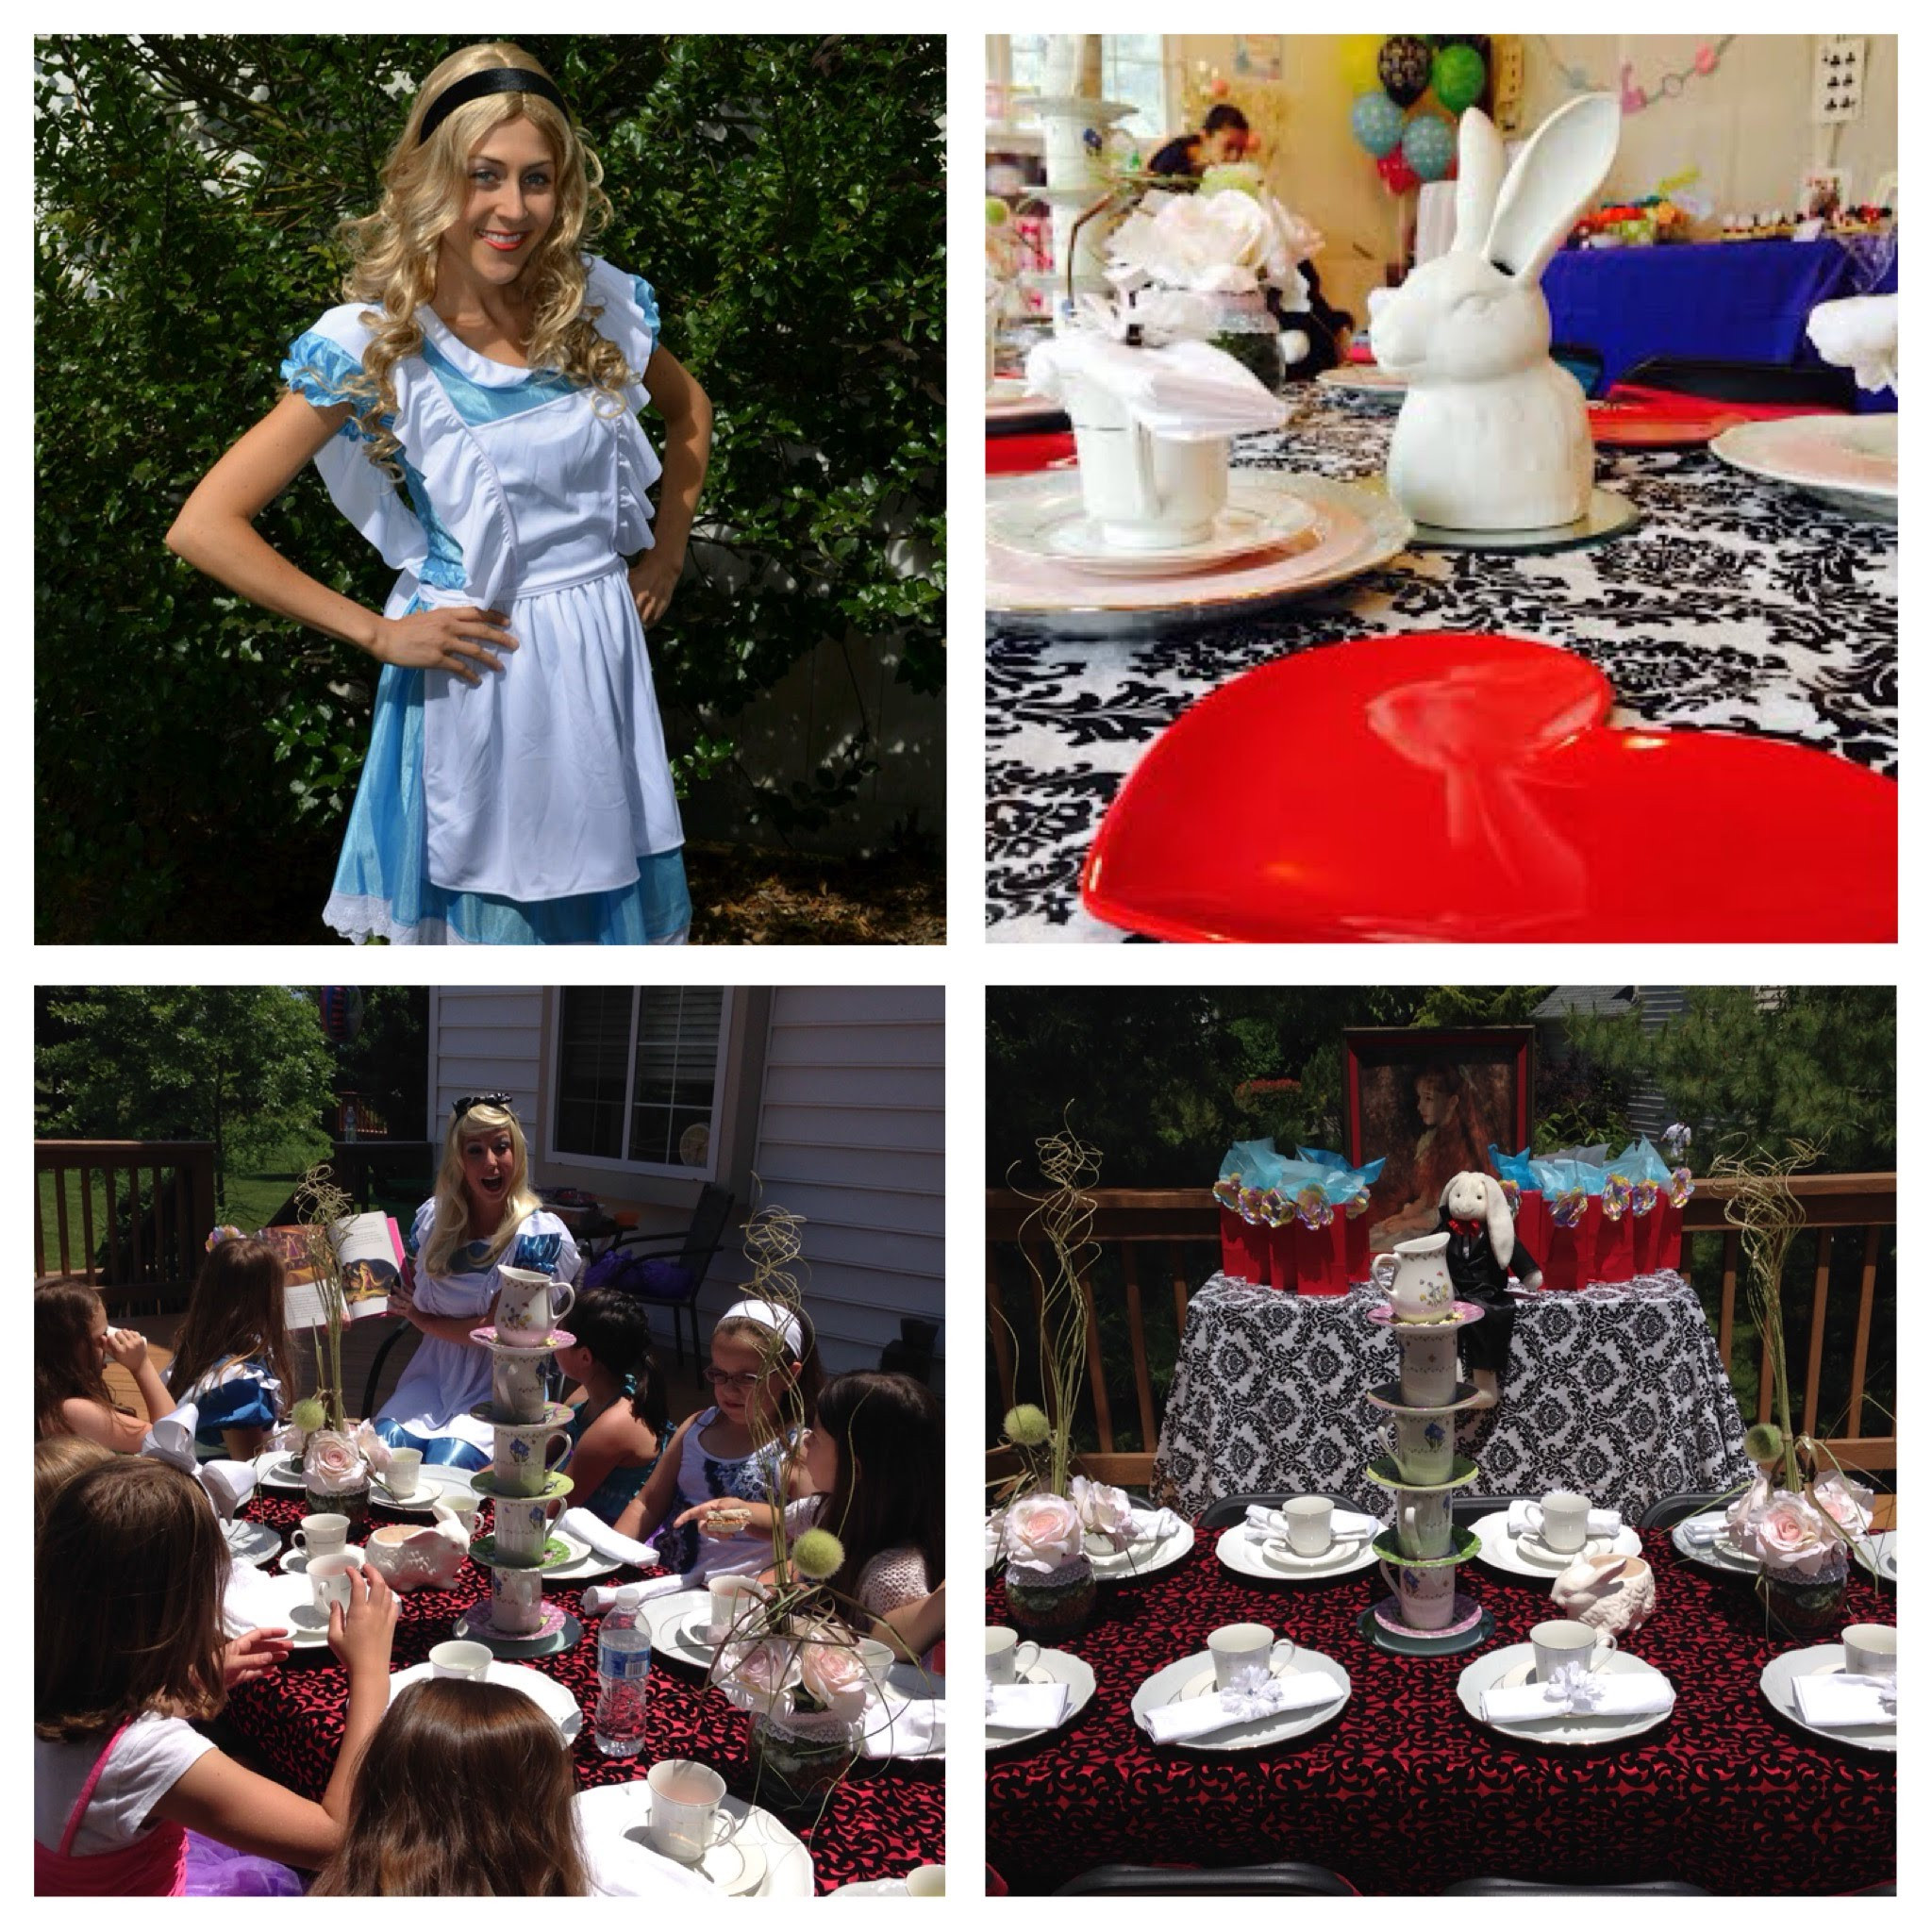 Entertainment For Kids Party At Home
 NJ Tea Parties at Home Alice in Wonderland Theme Party for